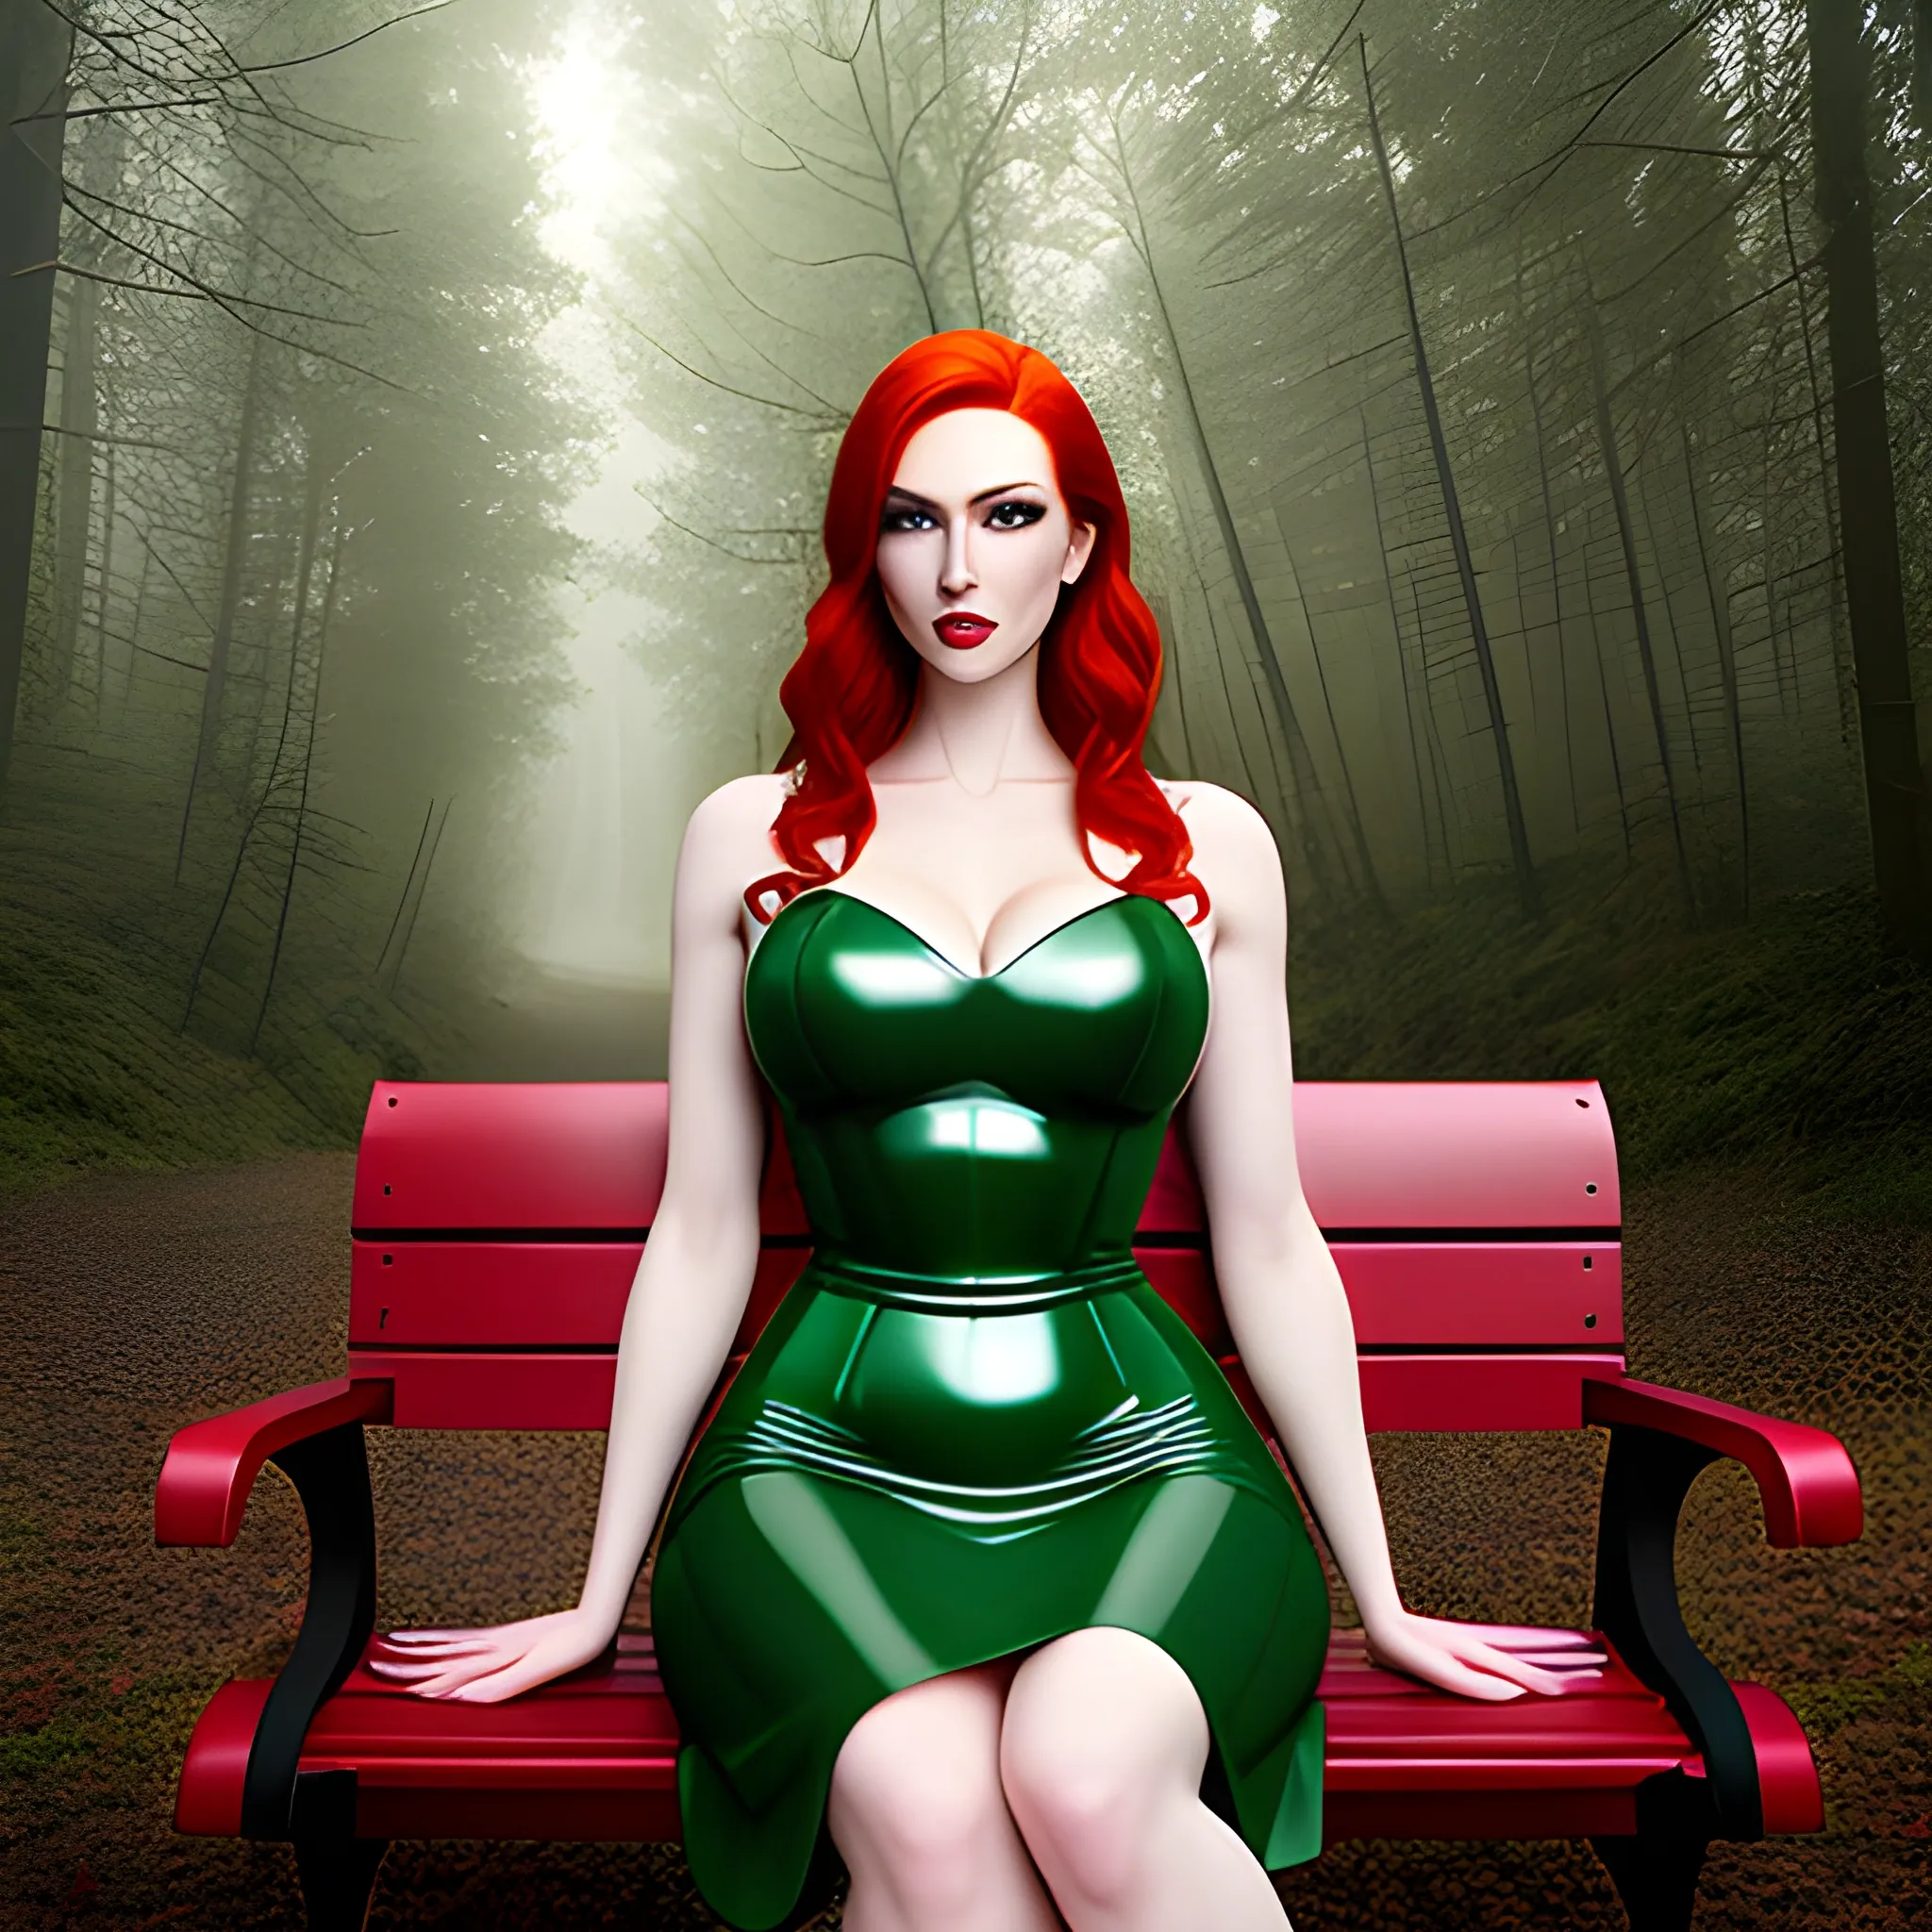 Create a photorealistic image of a young redhead woman with light green eyes and pale skin, wearing a dark red latex dress and sitting on a park bench. Chest visible, chest naked, whole body visible. In the background a gloomy forest in moonlight. High level of detail